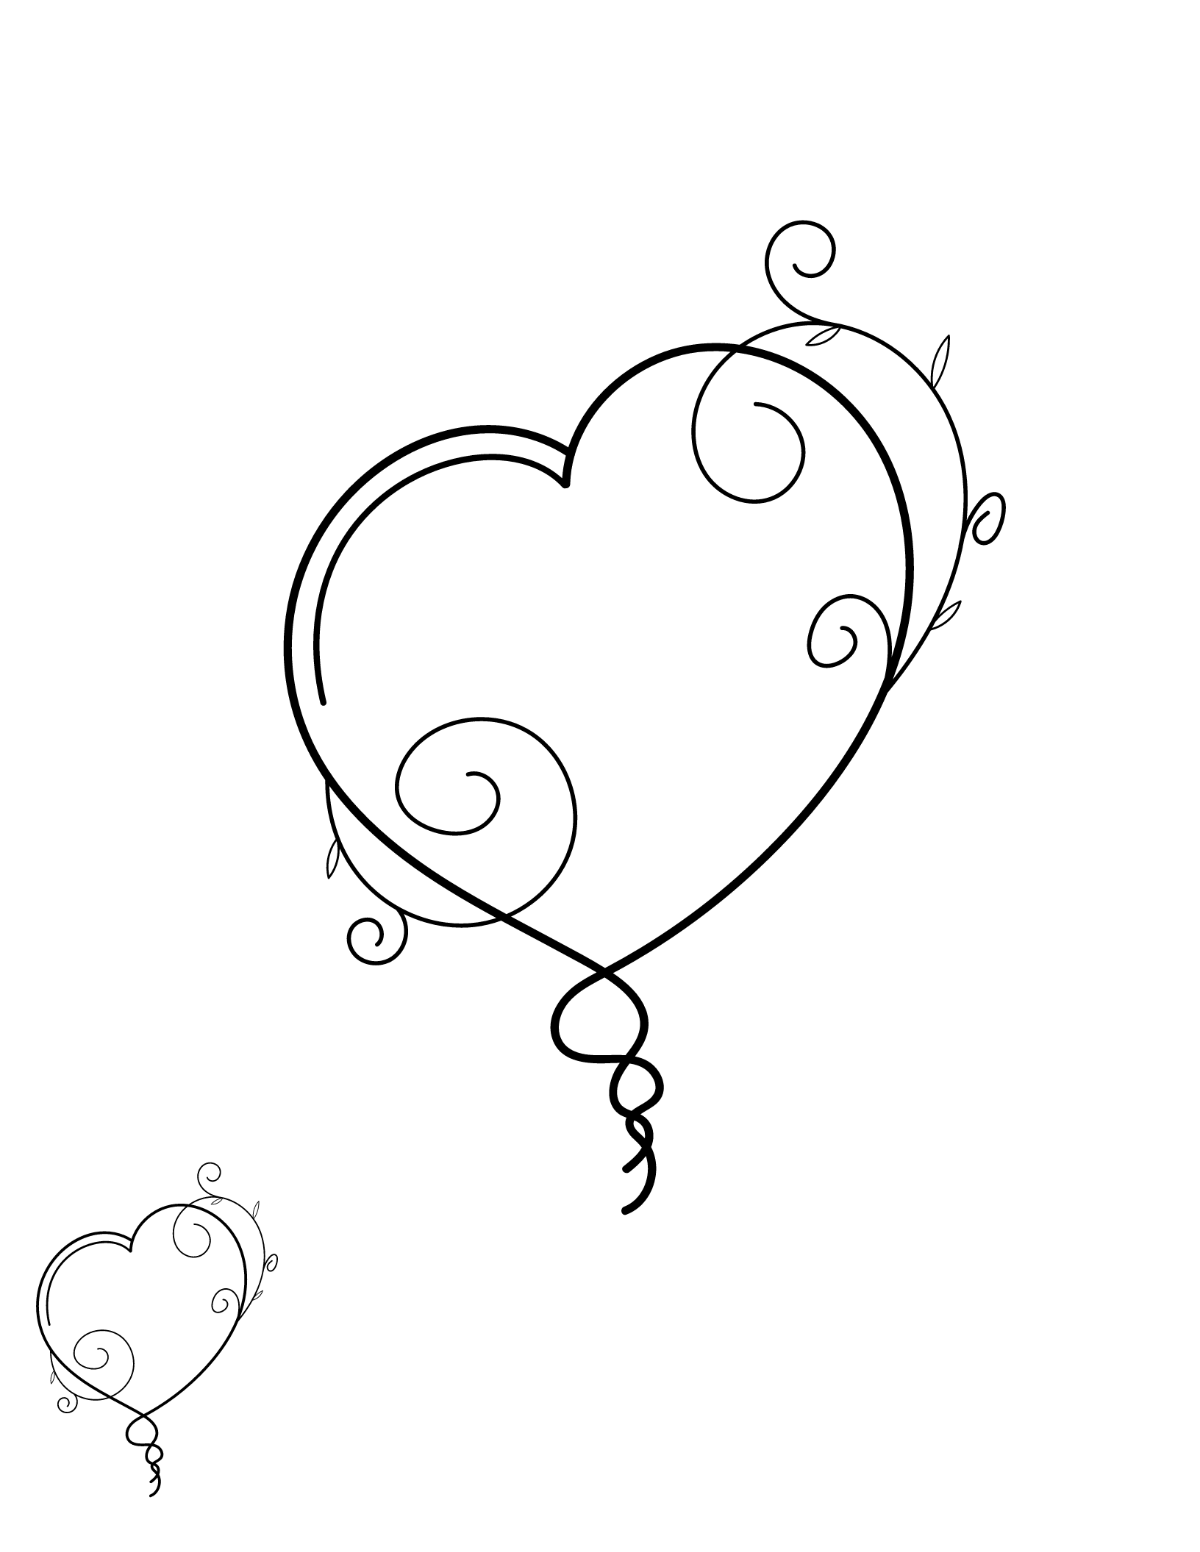 Fancy Heart Coloring Page Template